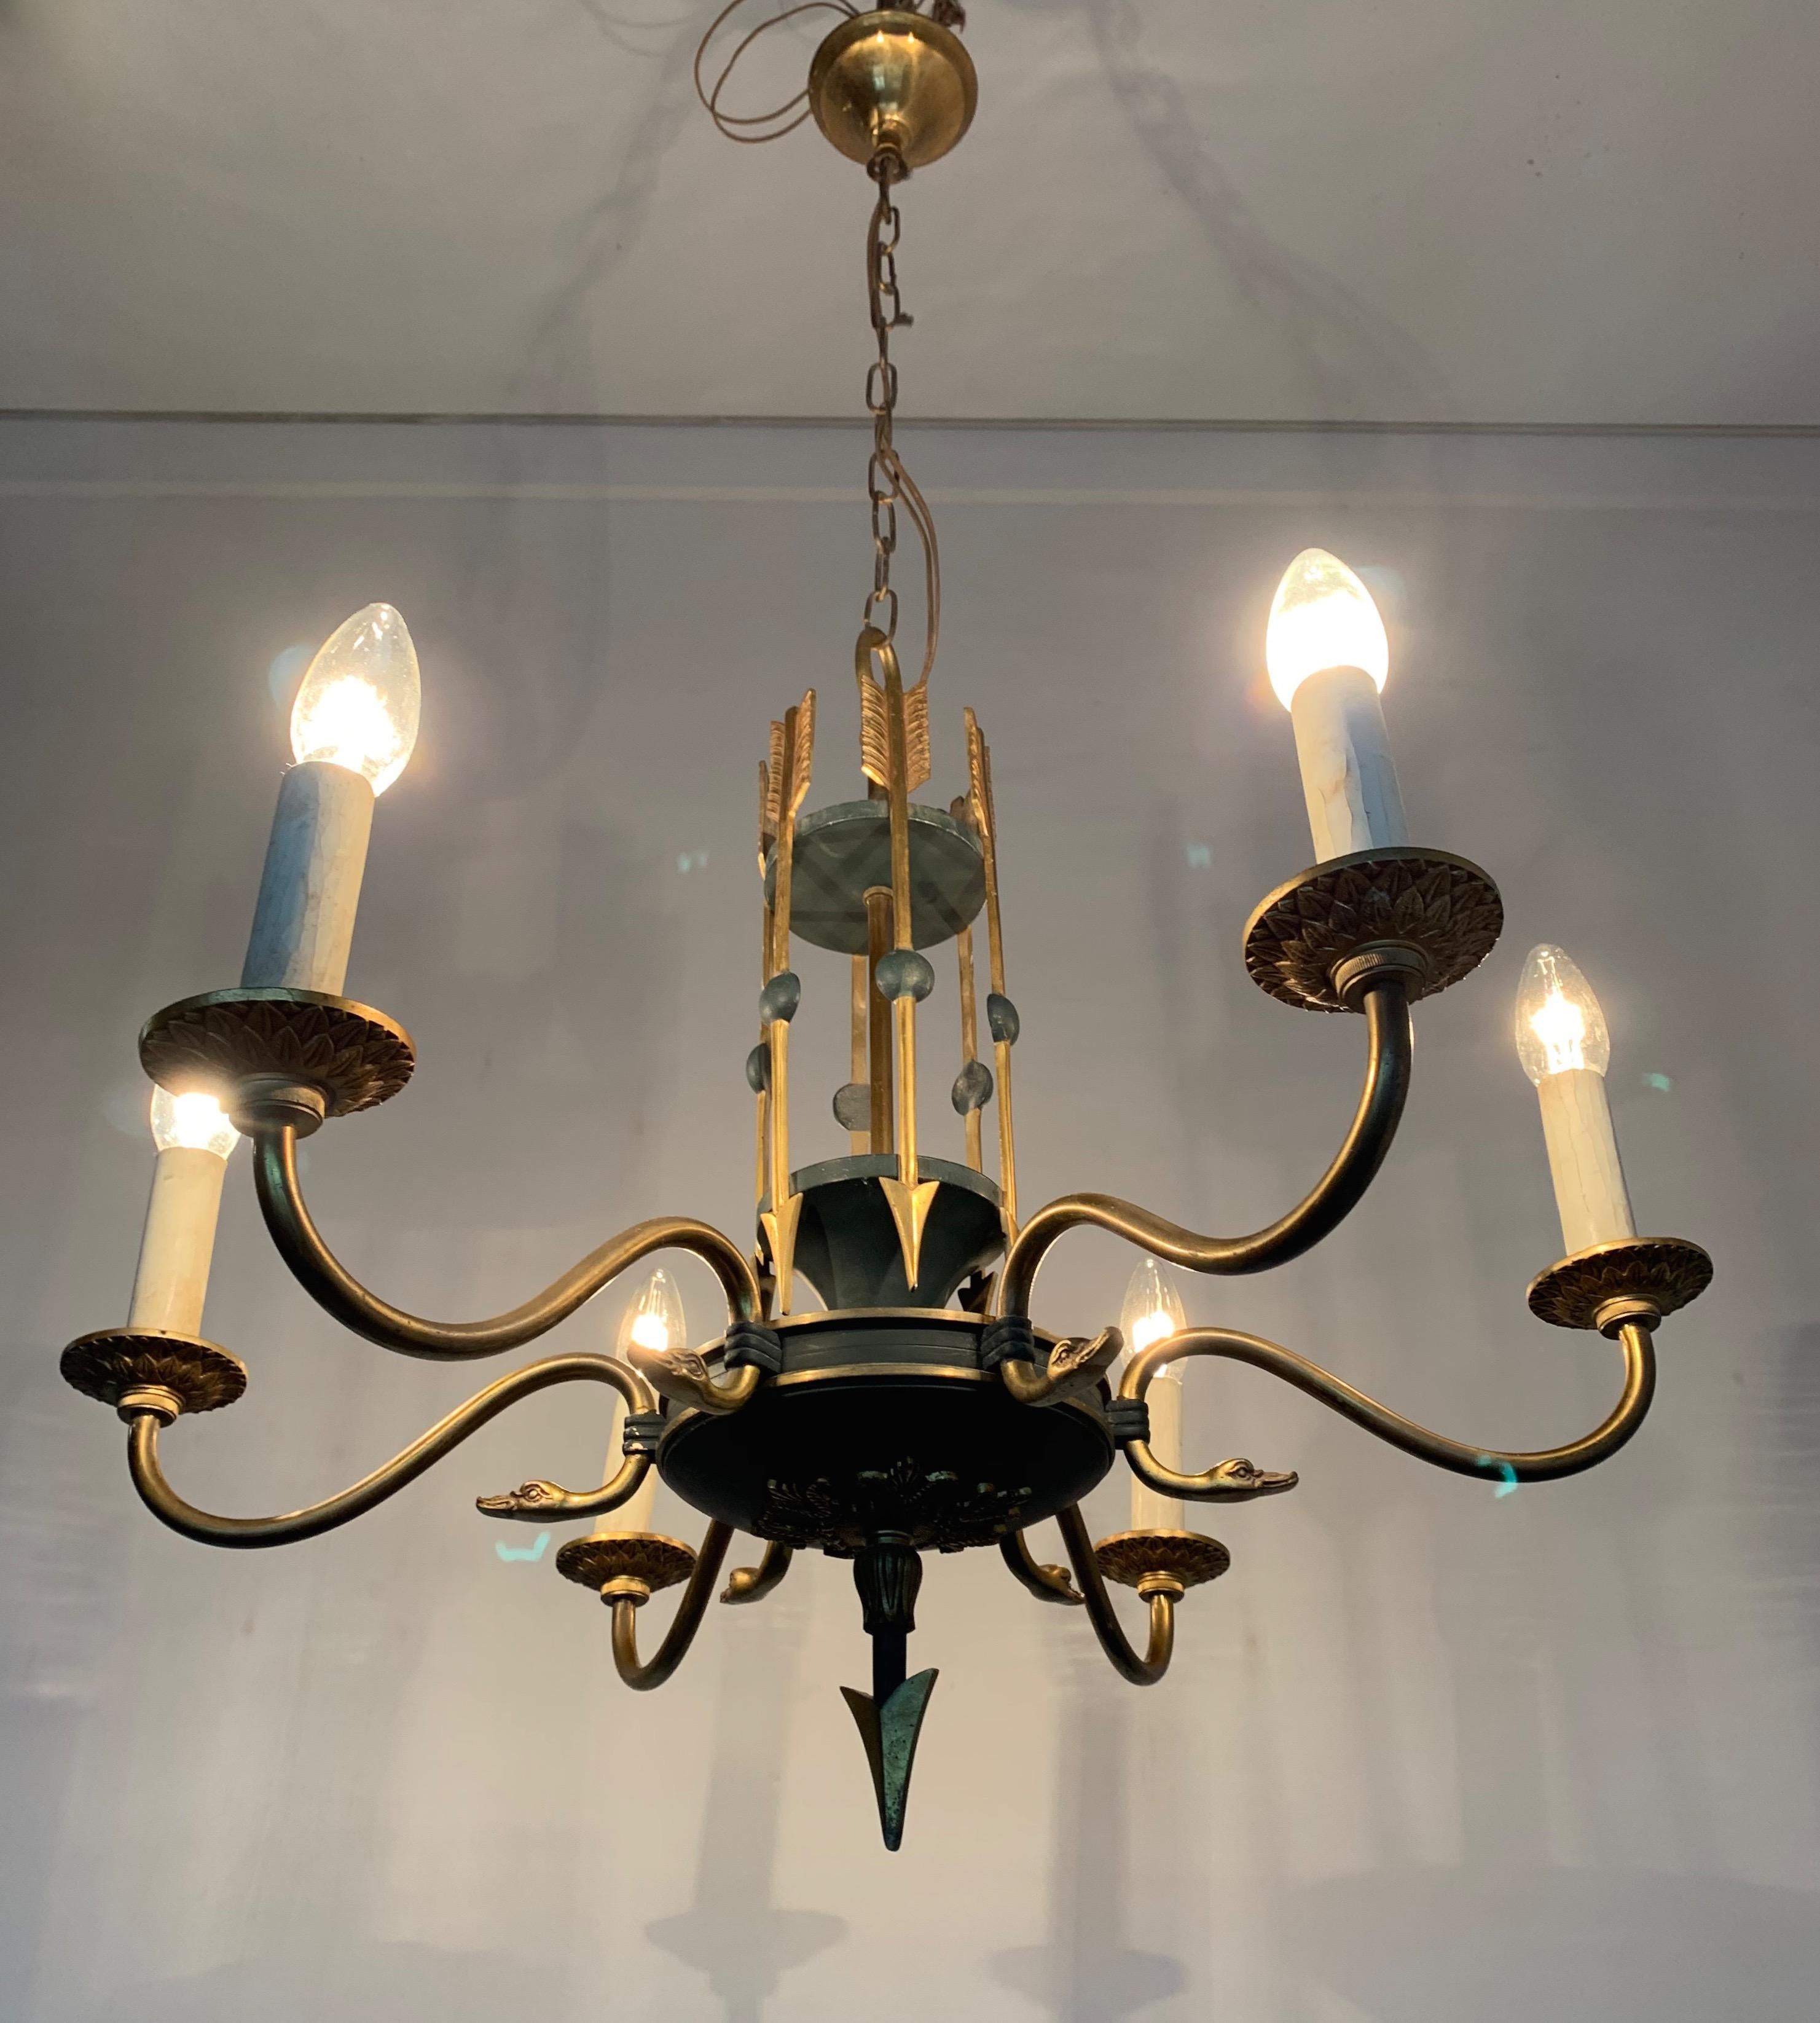 Brass Stylish Empire Revival Six-Light Pendant Chandelier with Swan Heads and Arrows For Sale